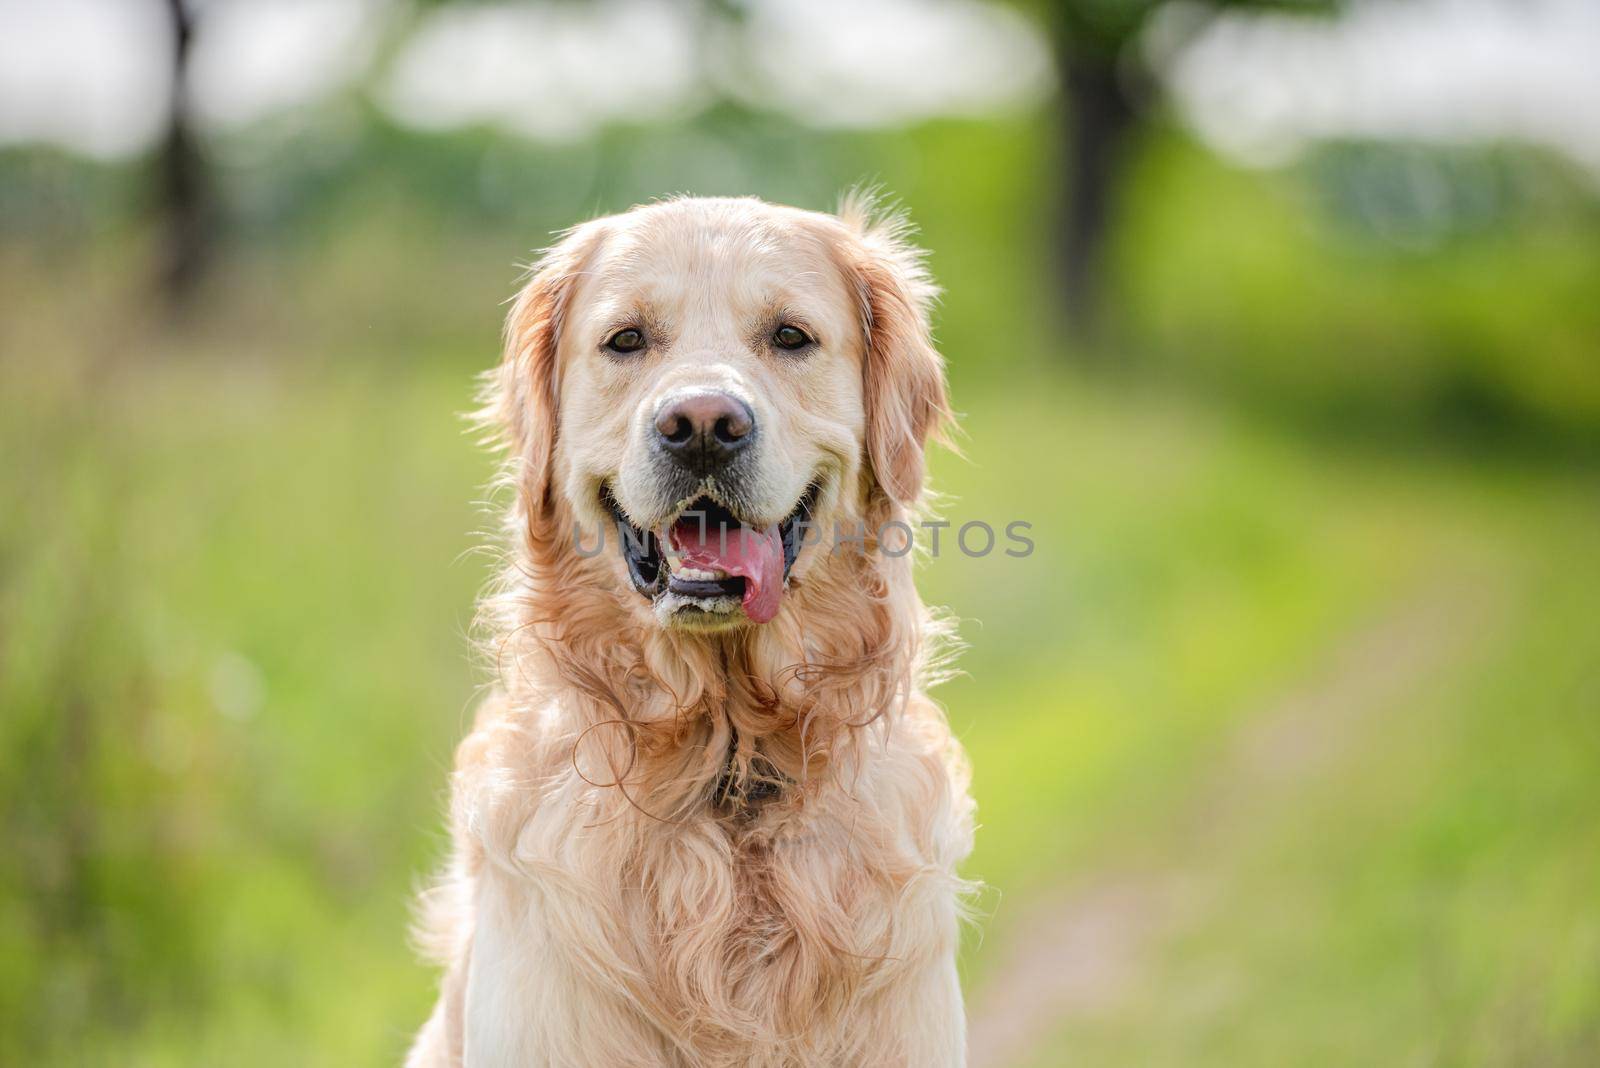 Adorable golden retriever dog sitting and looking at camera outdoors in green grass at the nature in summer time. Beautiful closeup portrait of doggy pet outside with blurred background